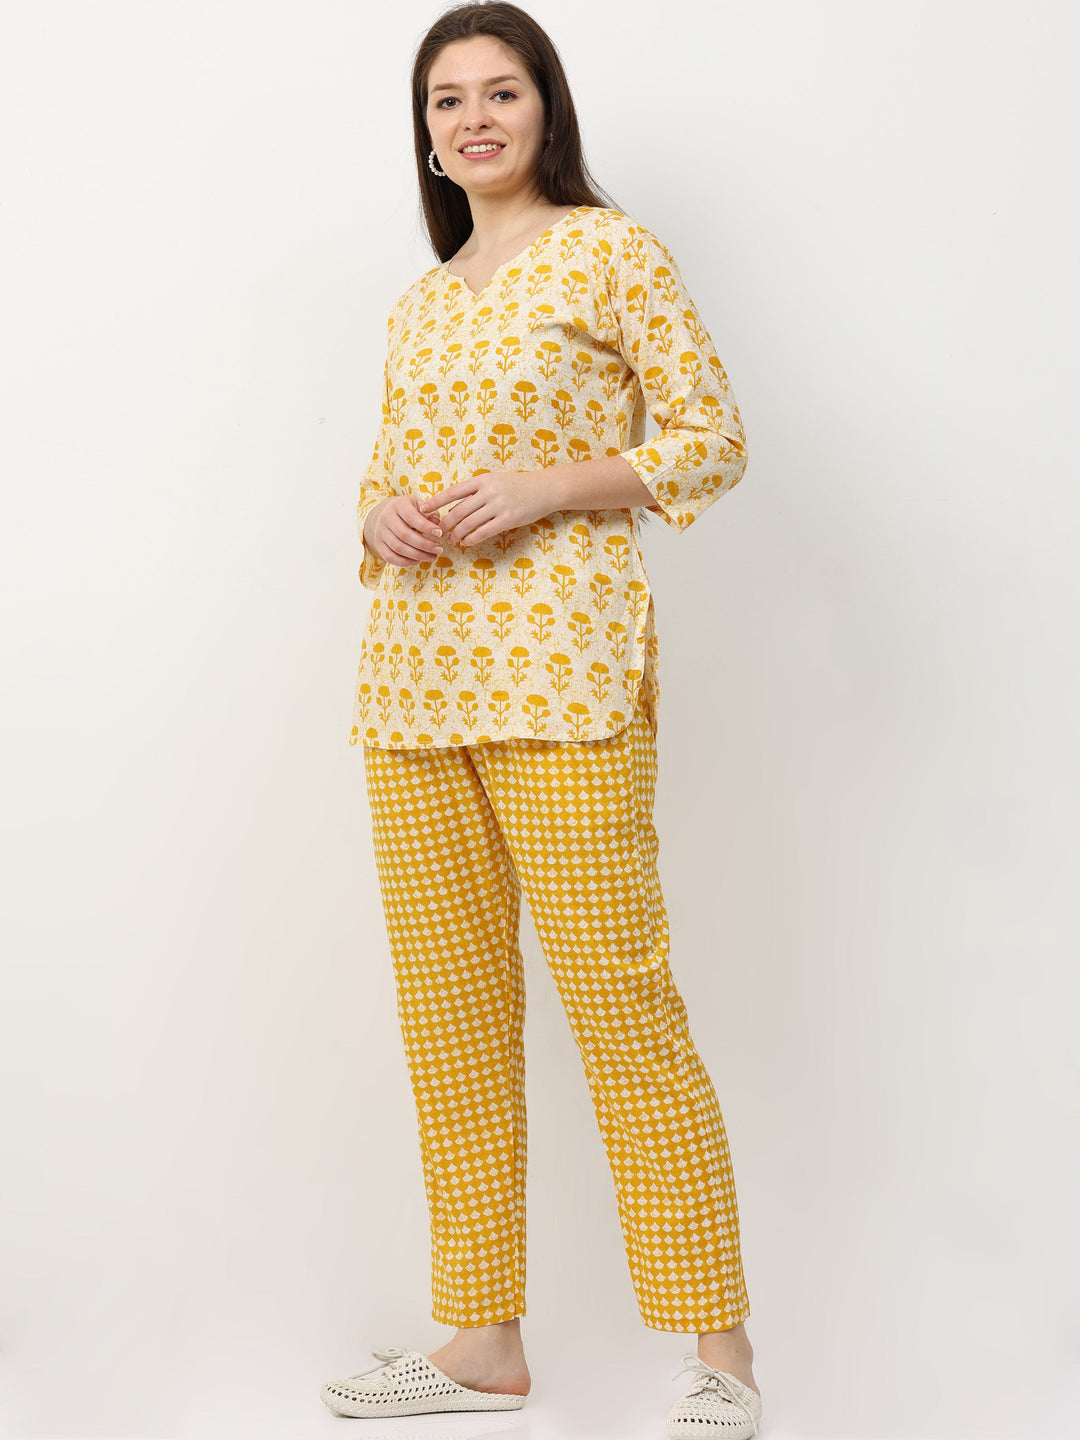  Co-ord sets  Shop Yellow co ords women's clothing at 9shineslabel- 9shines label 